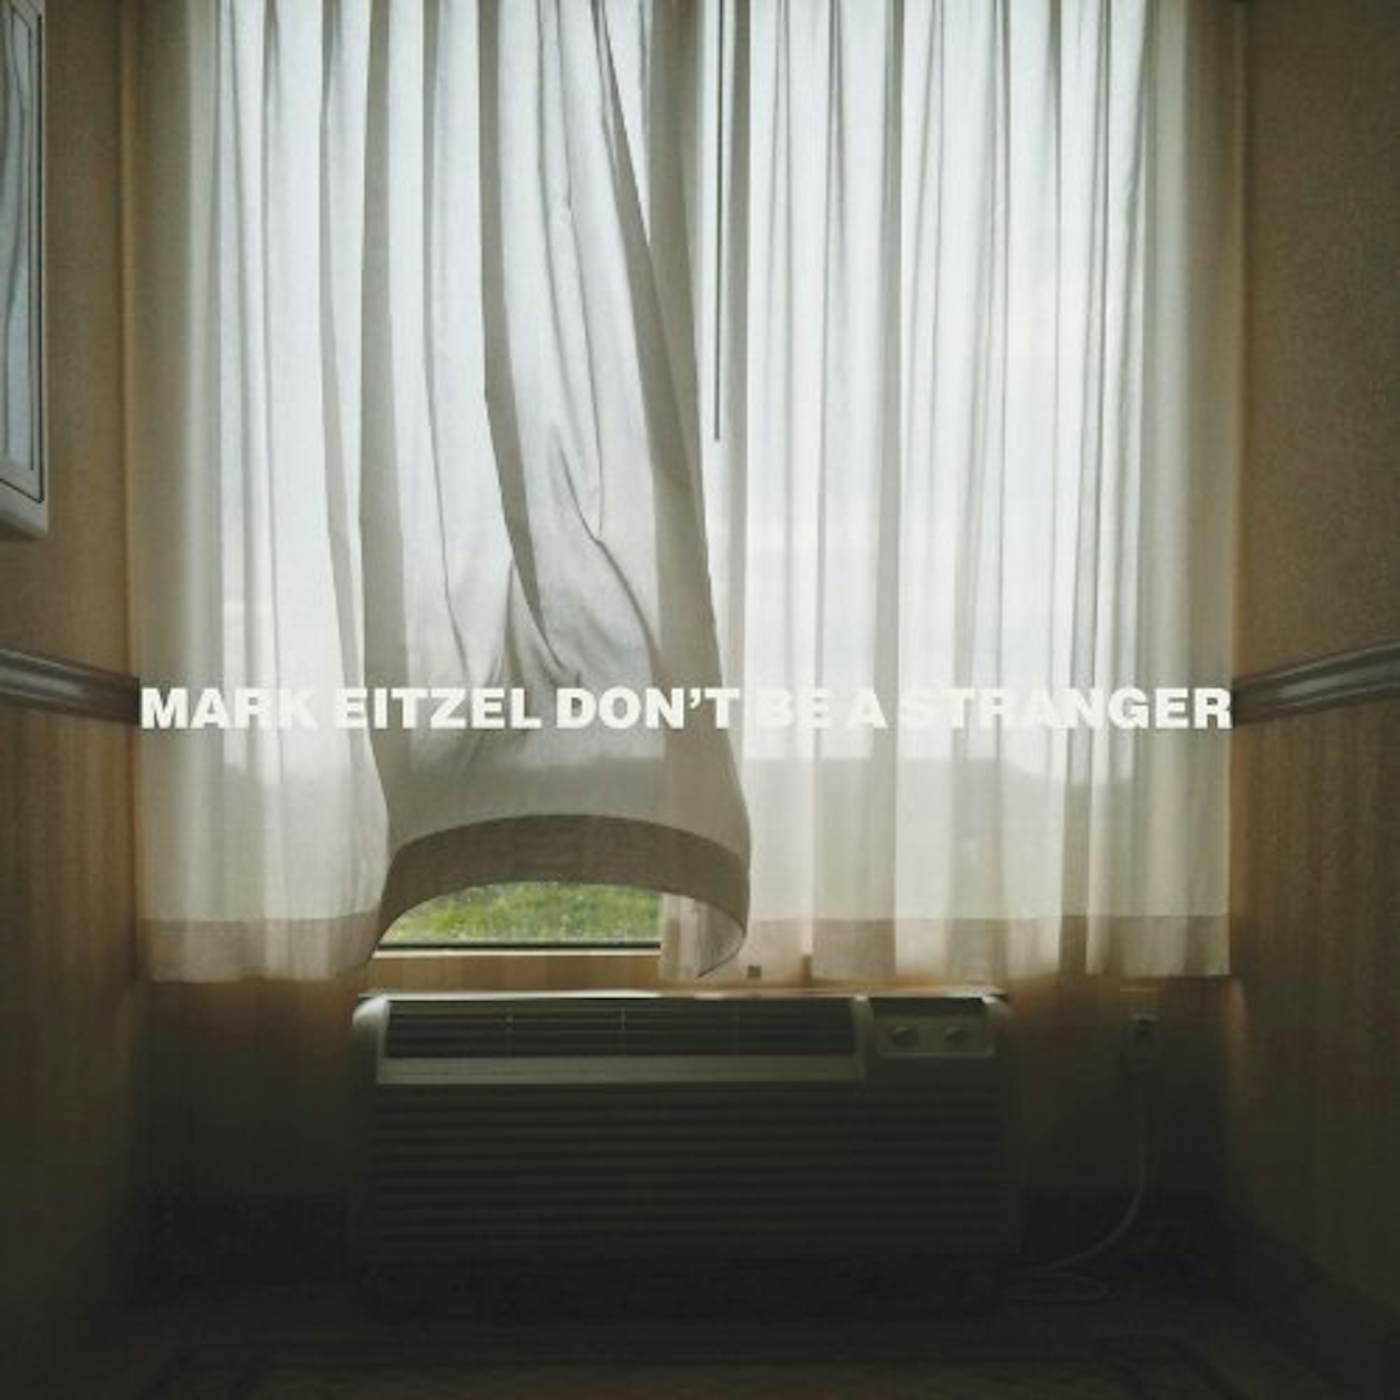 Mark Eitzel DON'T BE A STRANGER Vinyl Record - MP3 Download Included